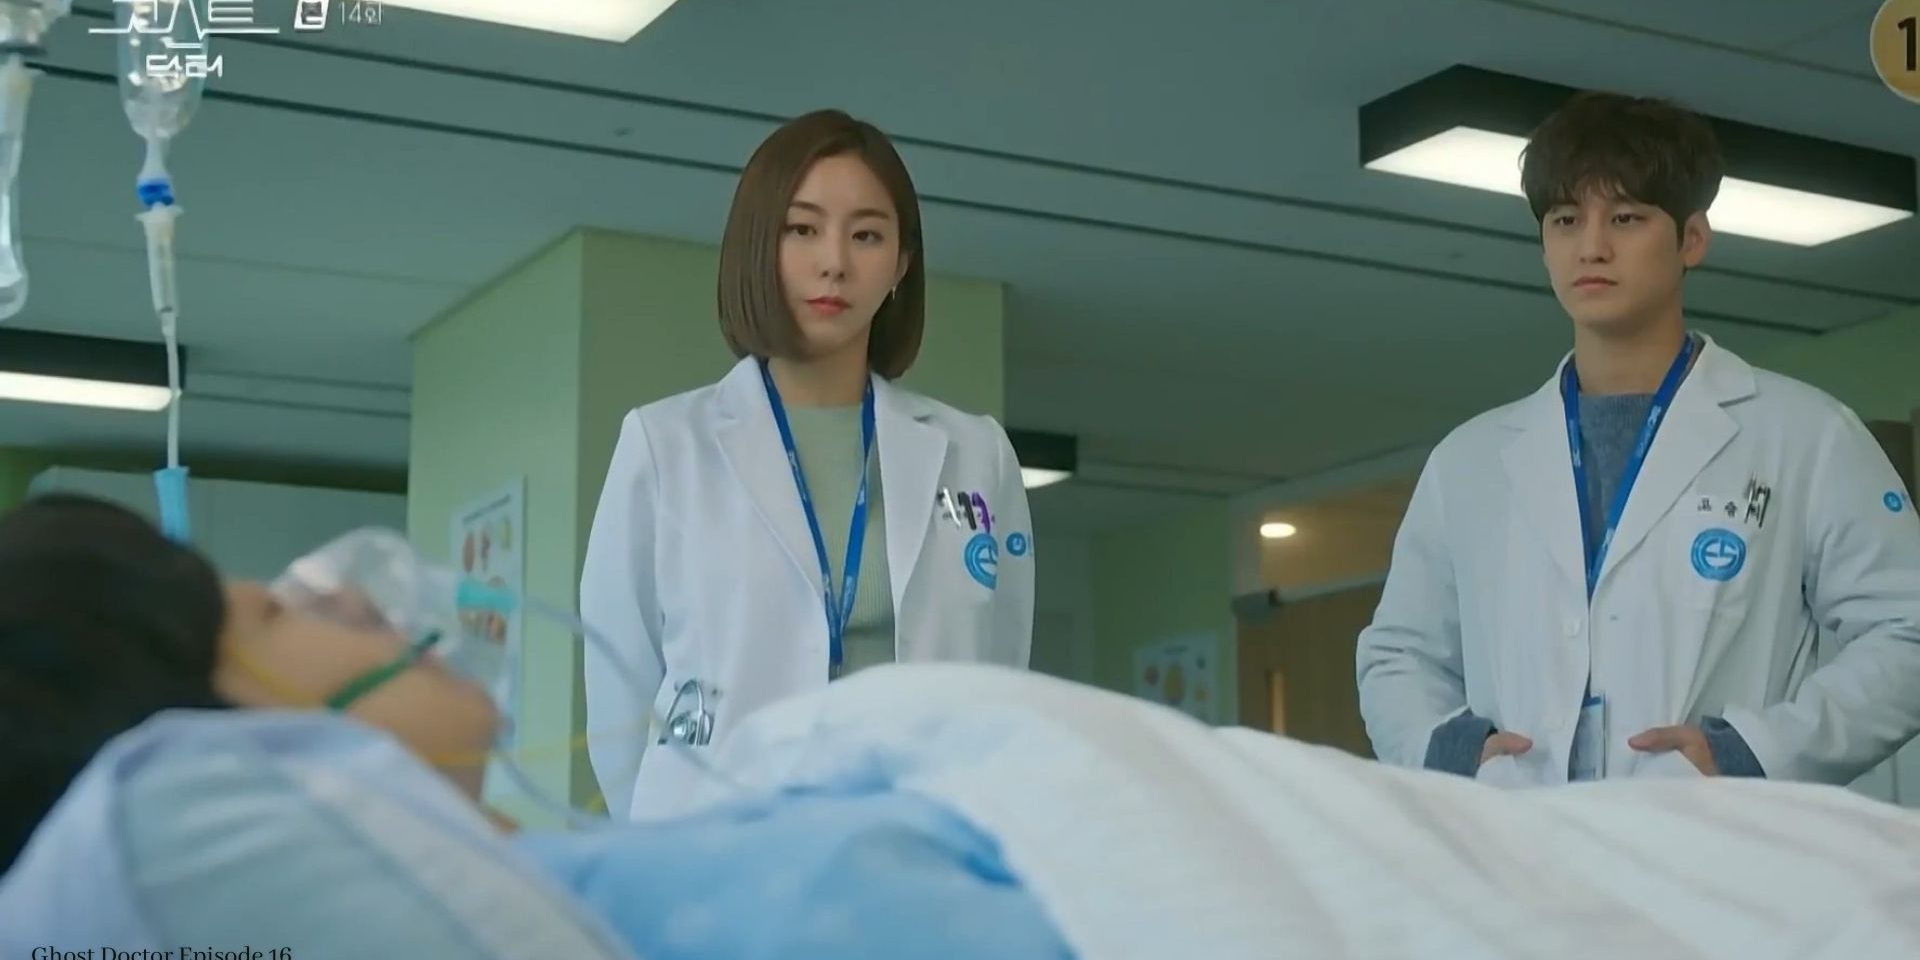 ‘Ghost Doctor Episode 16’: Is Young Min Going to Regain Consciousness?